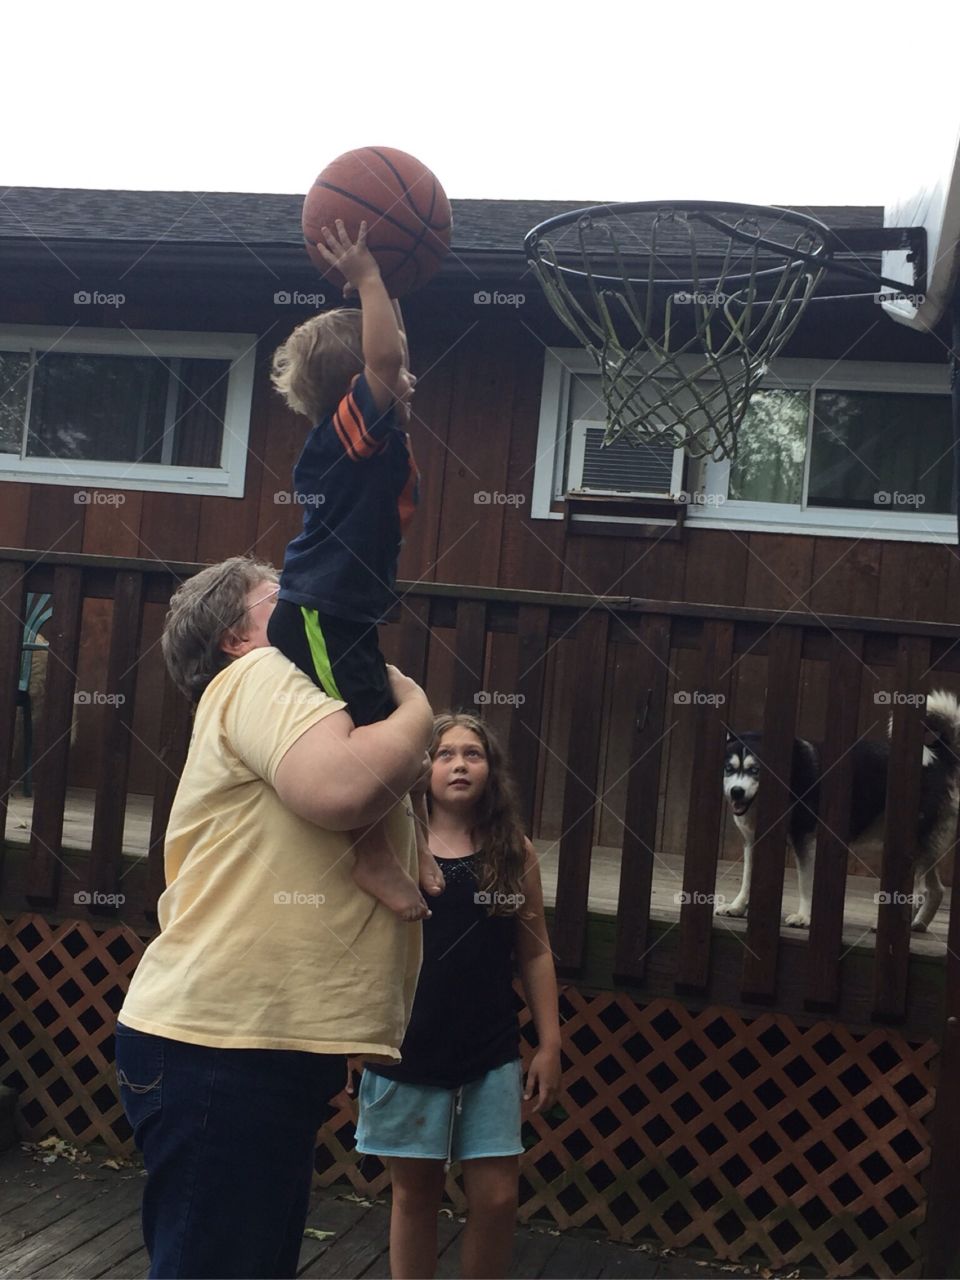 Man carrying his son for putting ball in basketball hoop